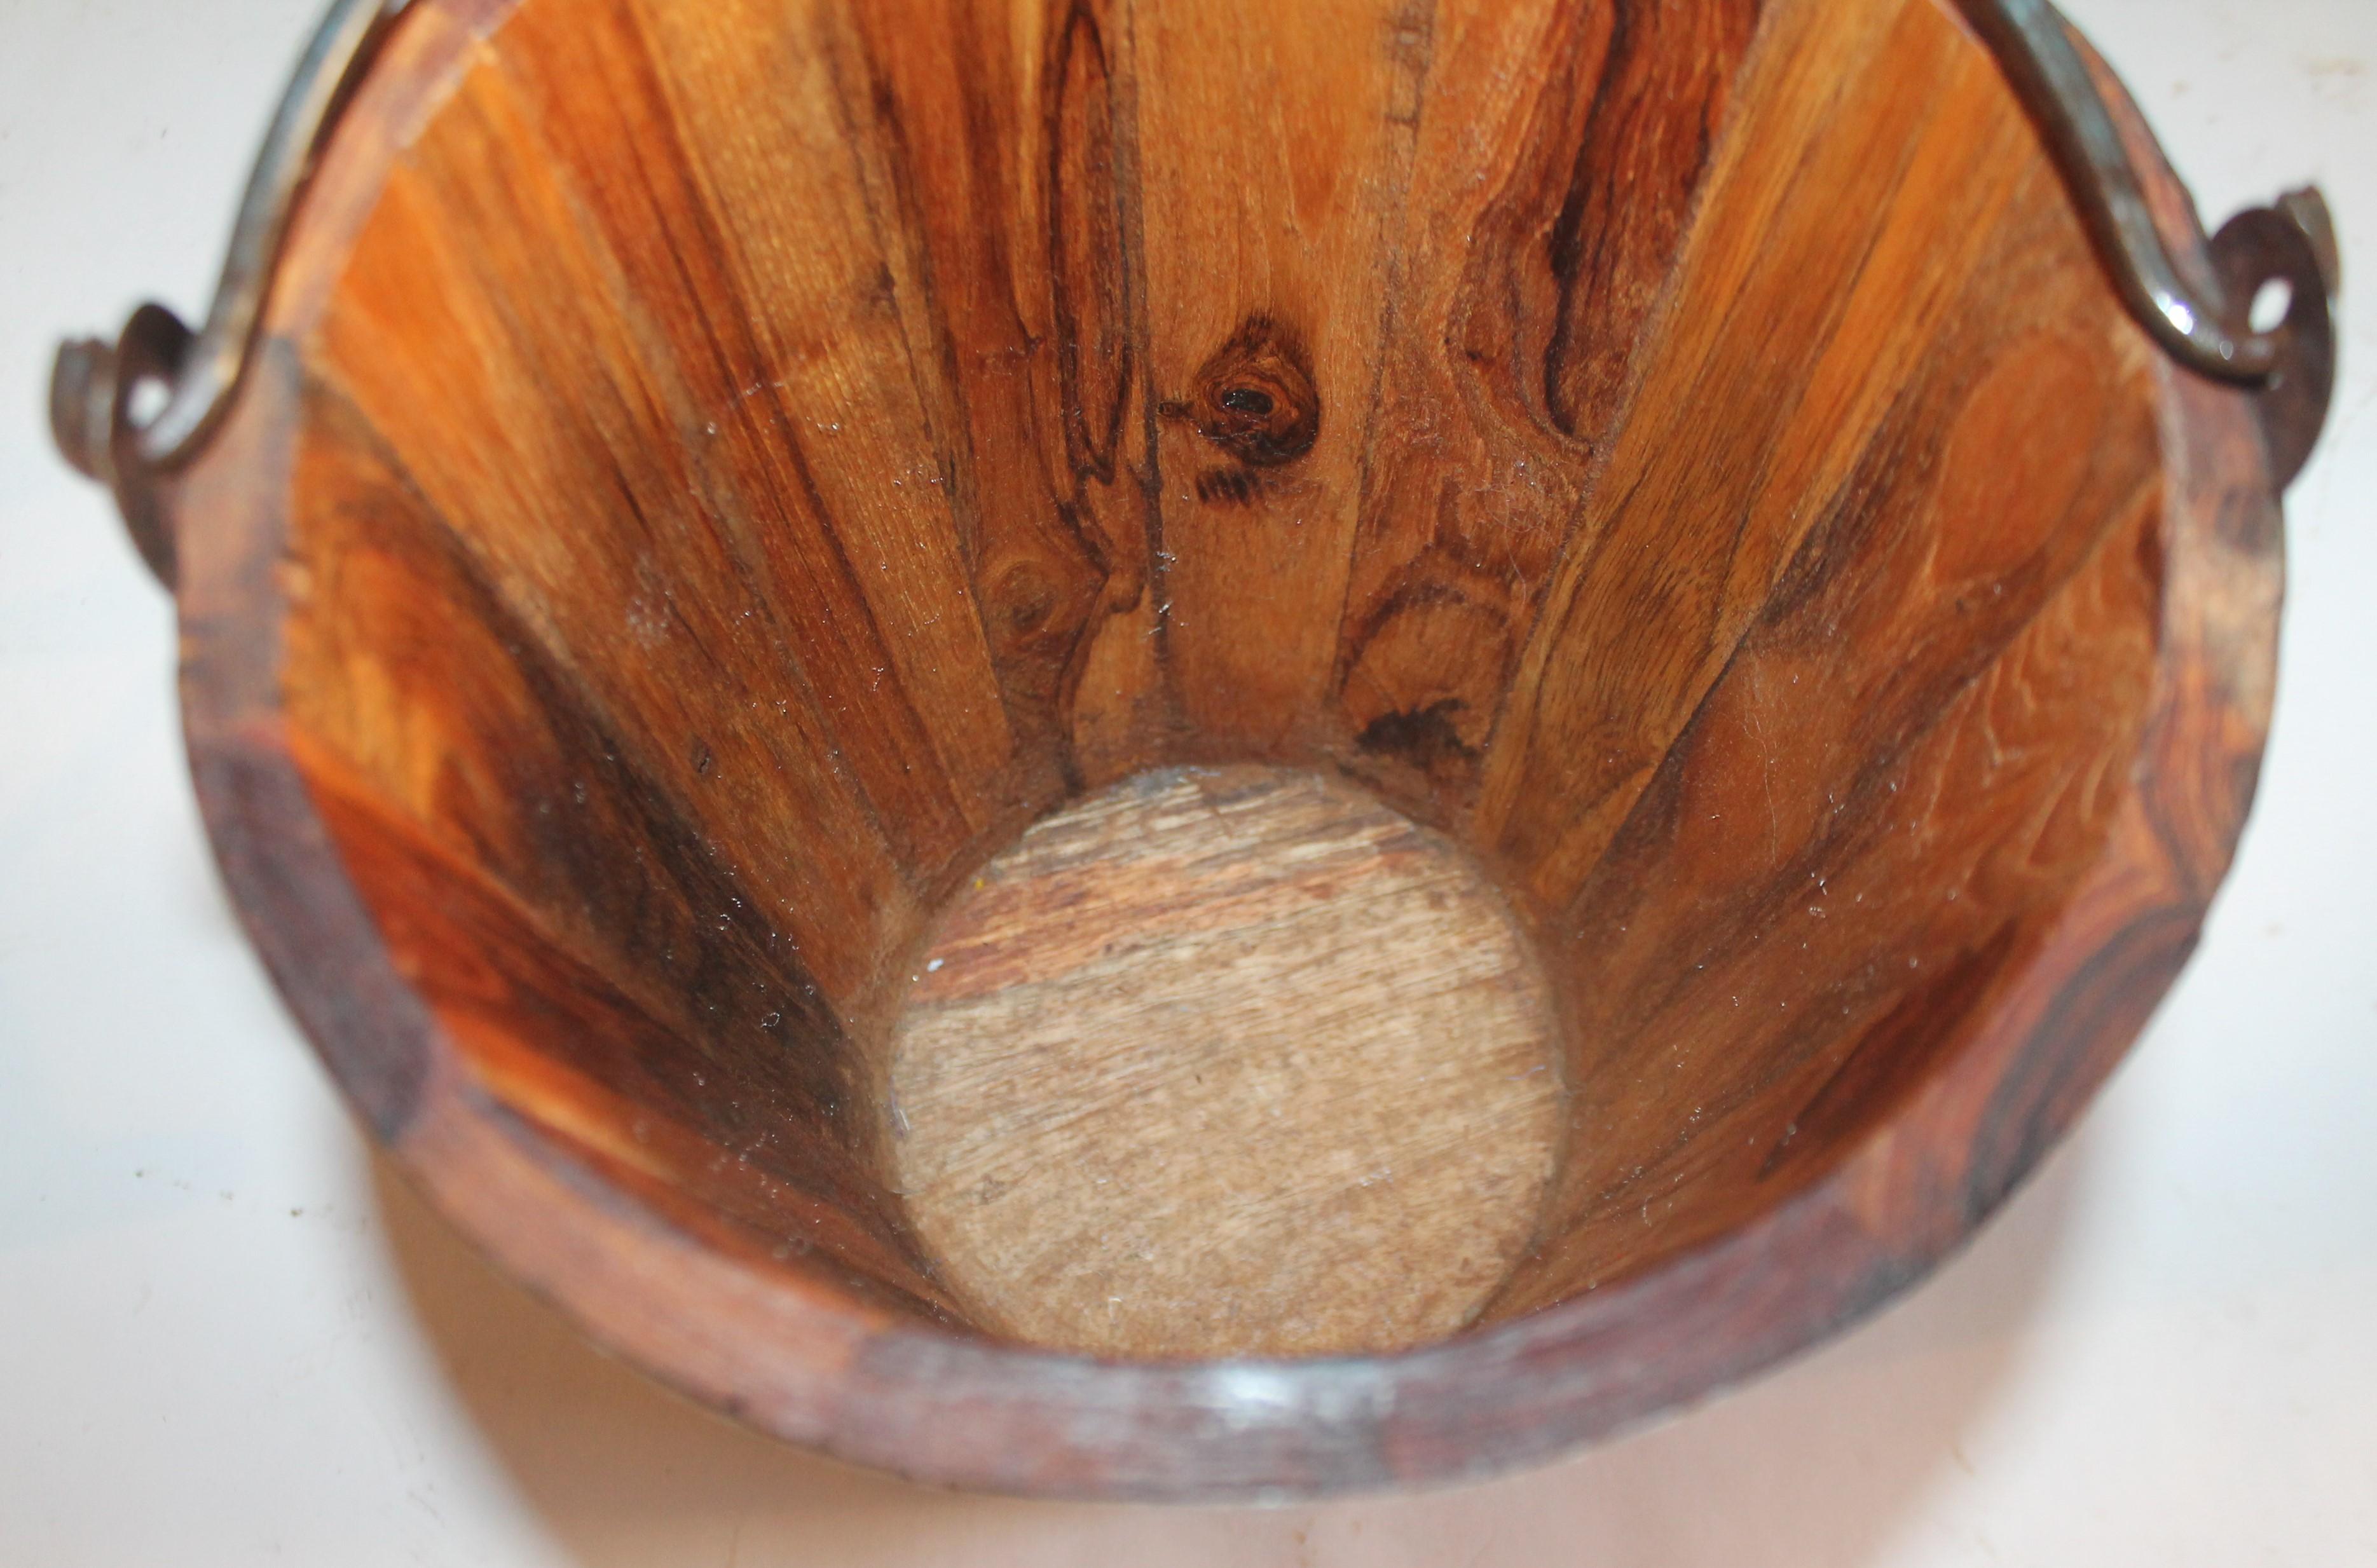 Hand-Crafted Early 20th Century Handcrafted Bucket from New England